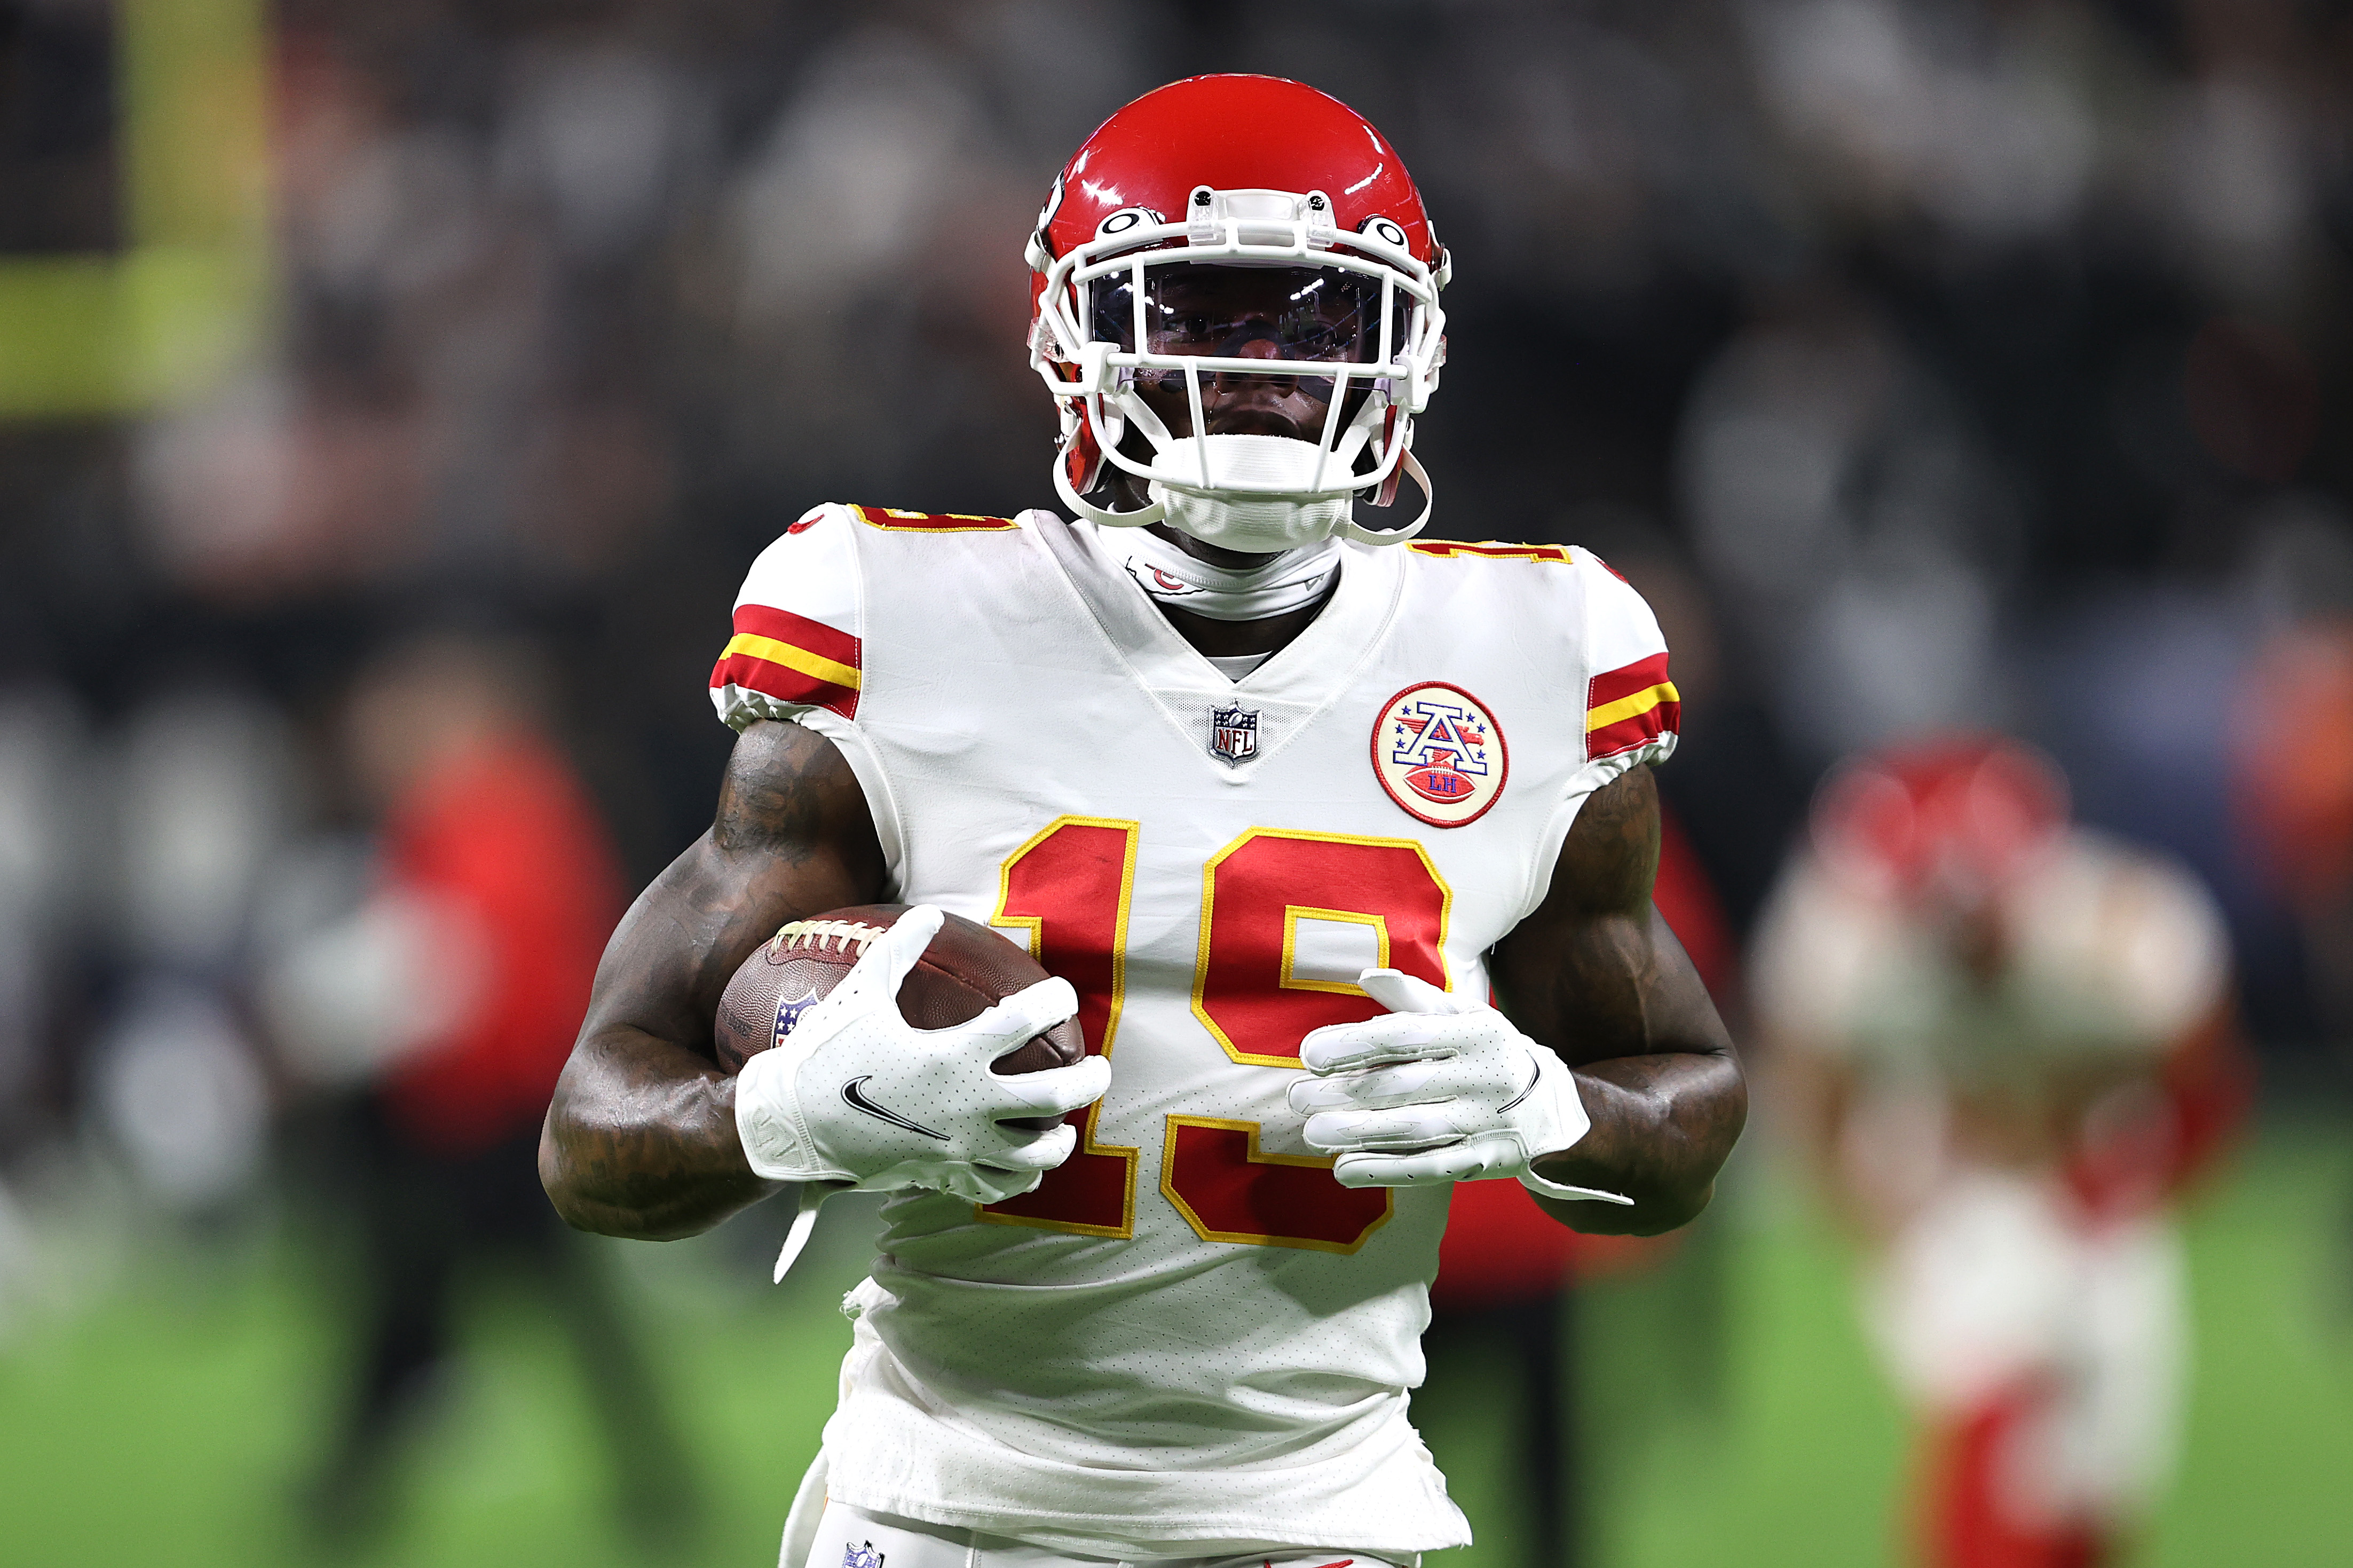 According to ESPN, Josh Gordon was reportedly cut by the Chiefs. KC plans to sign a WR to Practice Squad contract thumbnail